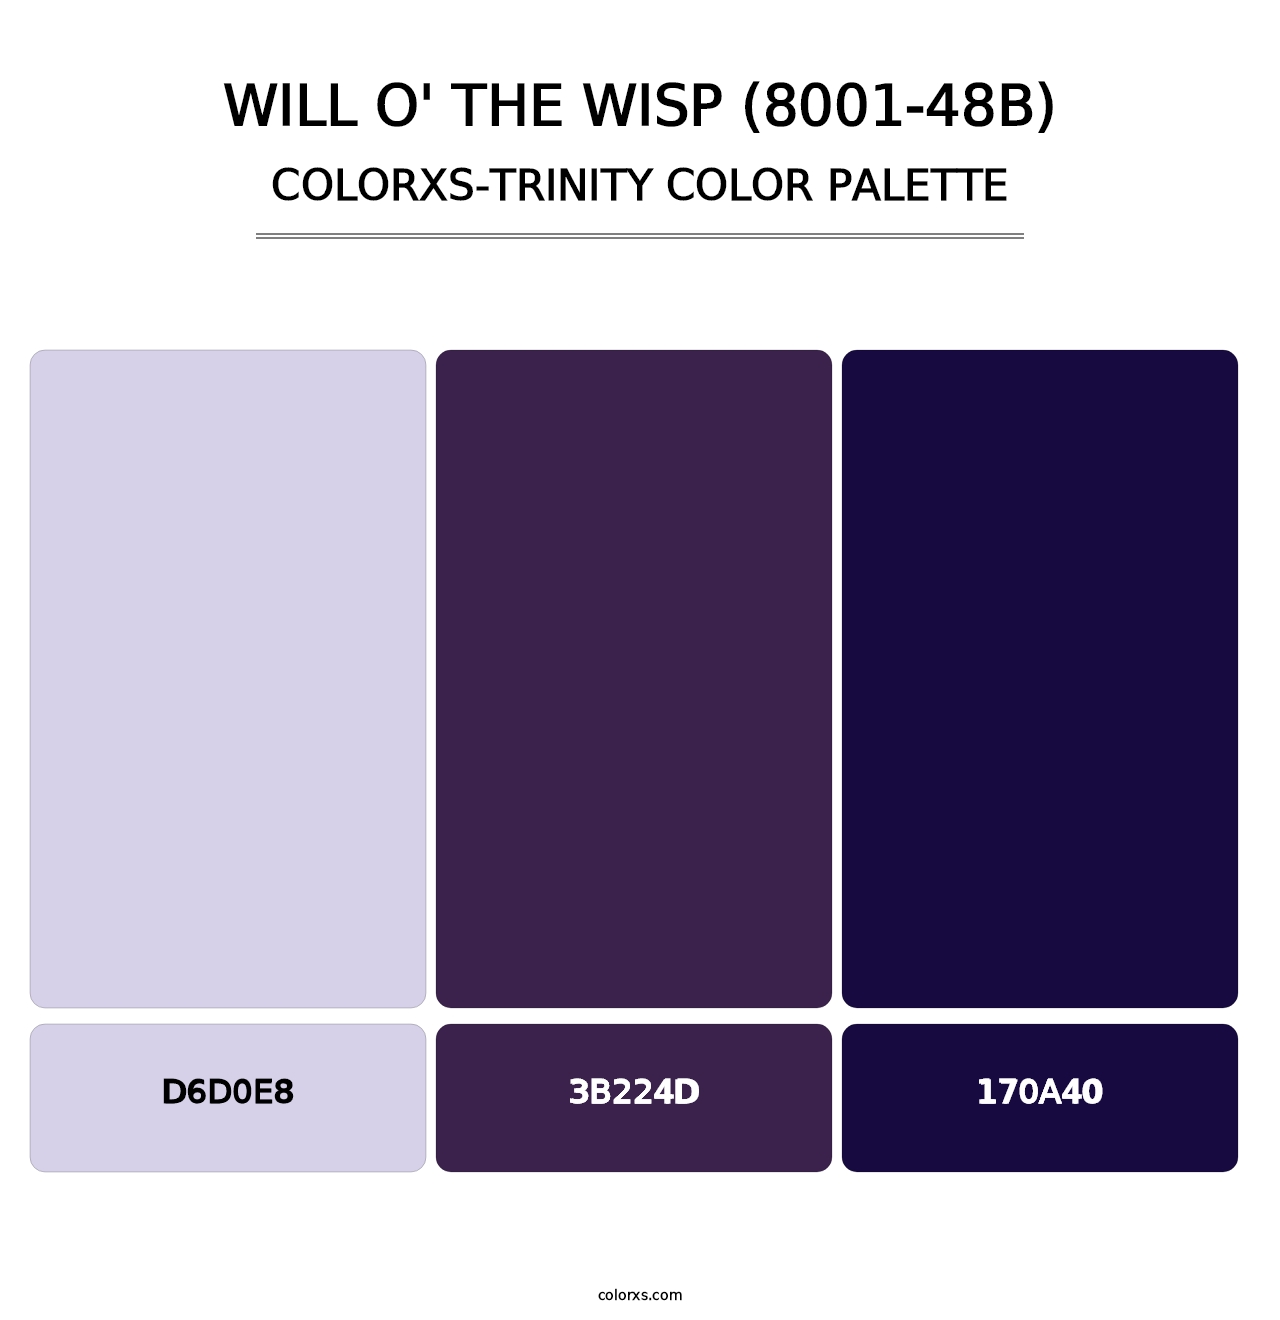 Will o' the Wisp (8001-48B) - Colorxs Trinity Palette